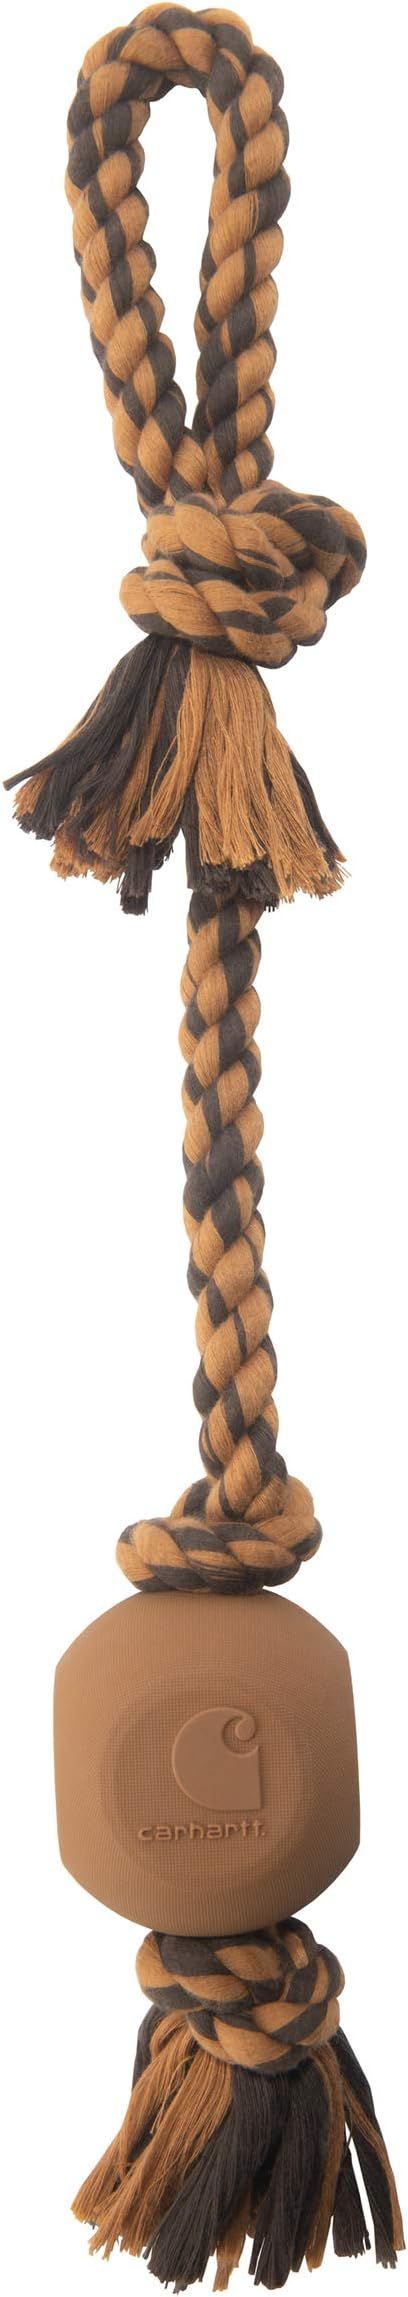 Carhartt Pet Toys Rubber Ball Dog Rope Pull, Durable Pull for Dogs, Carhartt Brown/Dark Brown | Amazon (US)